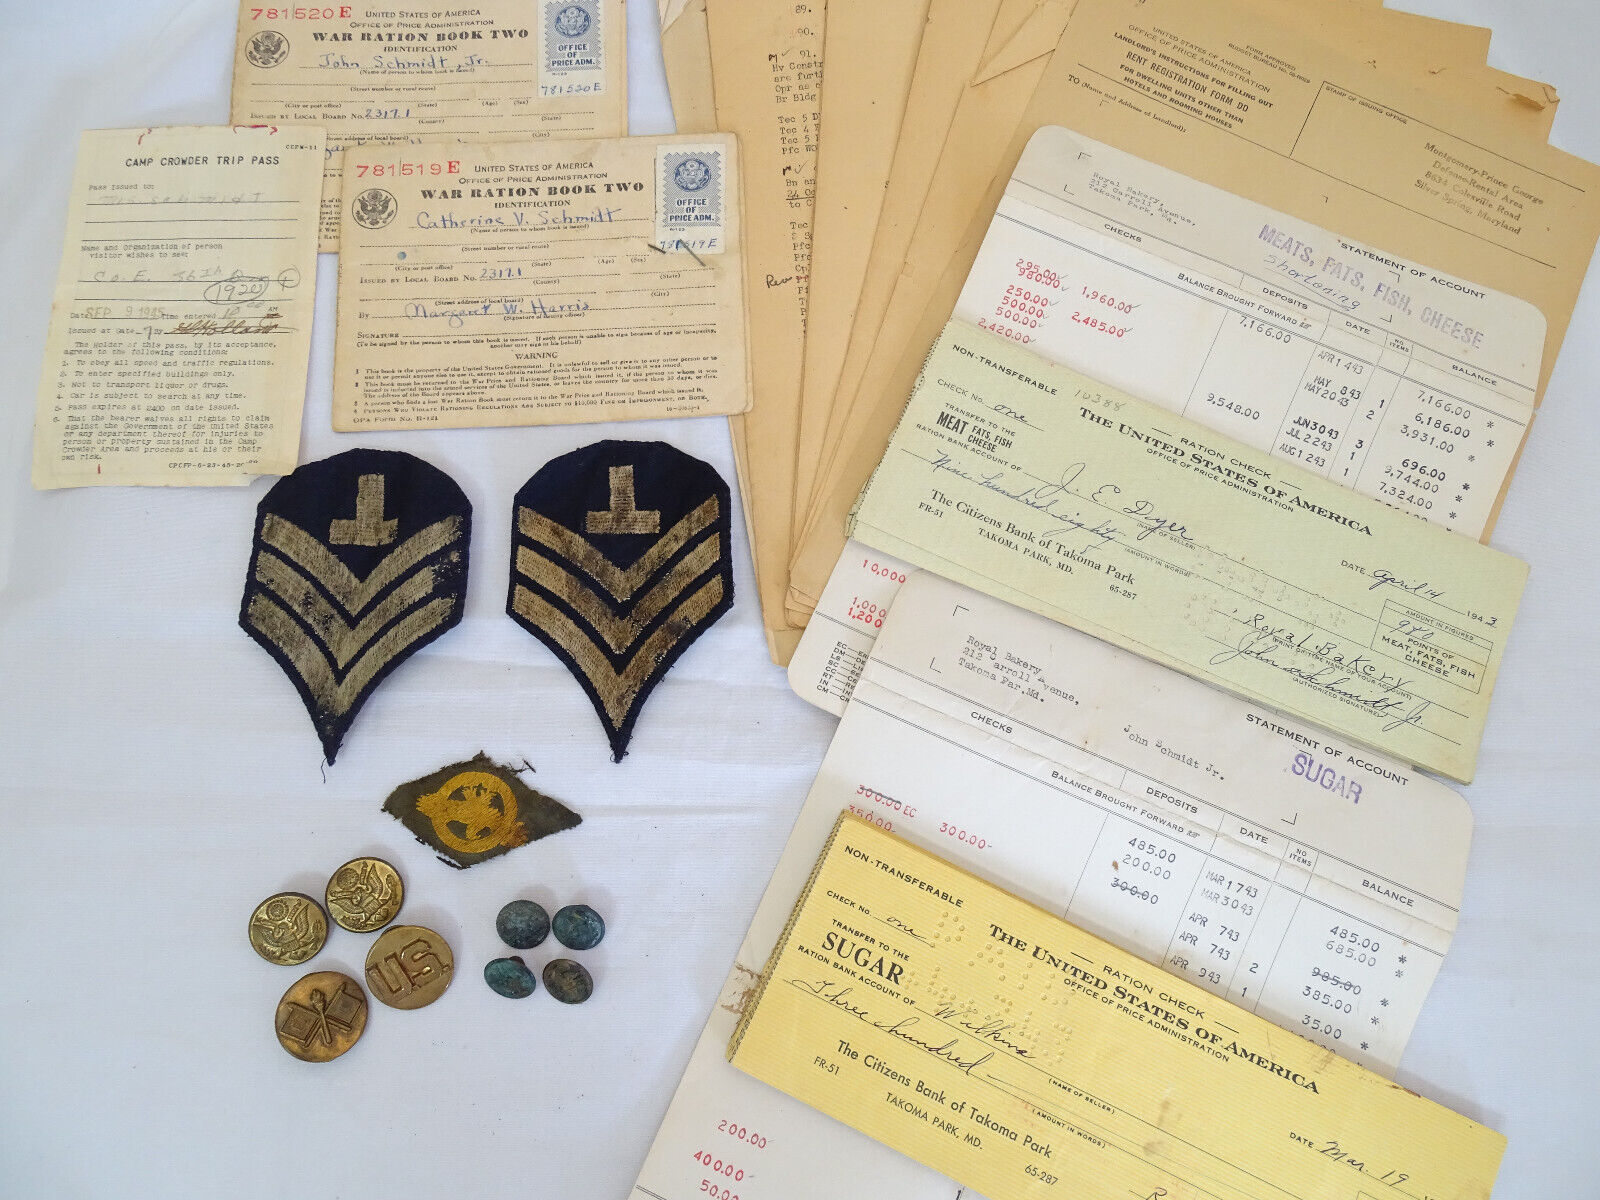 Assorted Vintage World War II Patches, Buttons, Ration Books and Checks, Etc.